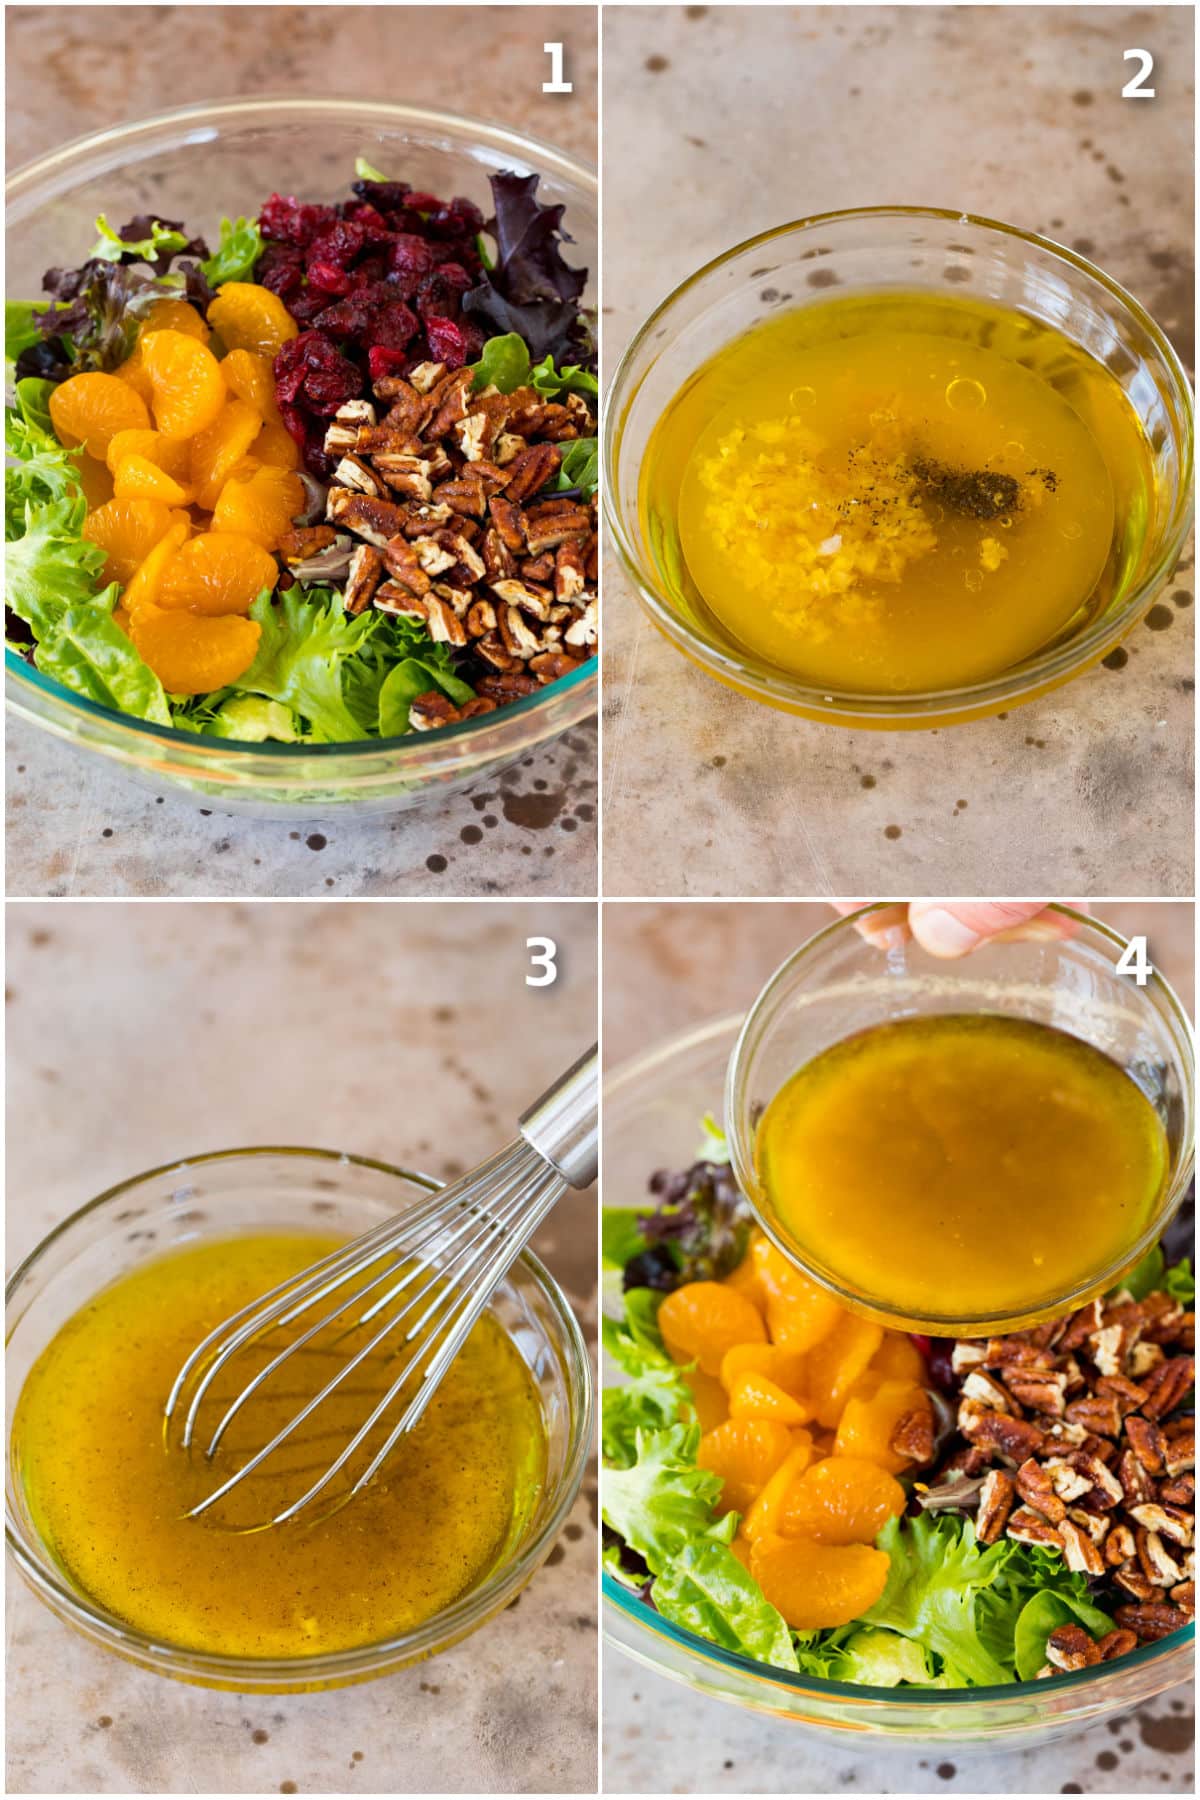 Step by step process shots showing how to make a mandarin orange salad.